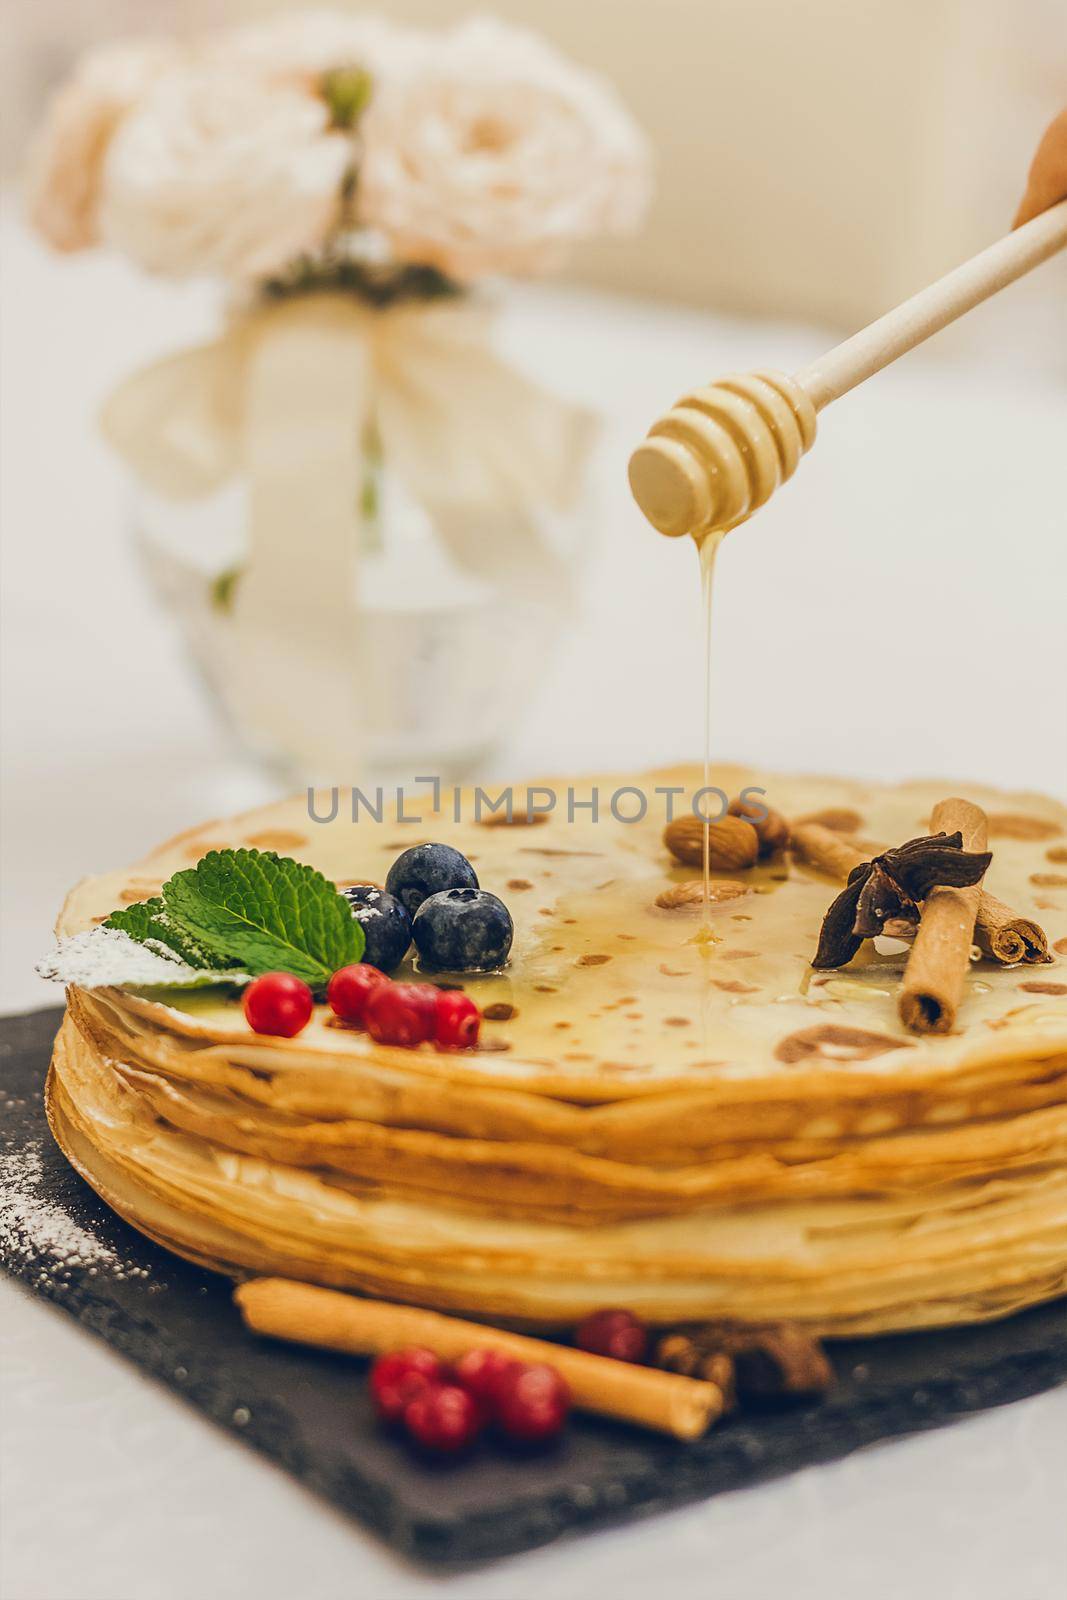 Plate of pancakes dripping with honey with cranberries and blueberries, cinnamon sticks. Shrovetide Maslenitsa Butter Week festival meal. Shrove Tuesday. Pancake day. by mmp1206